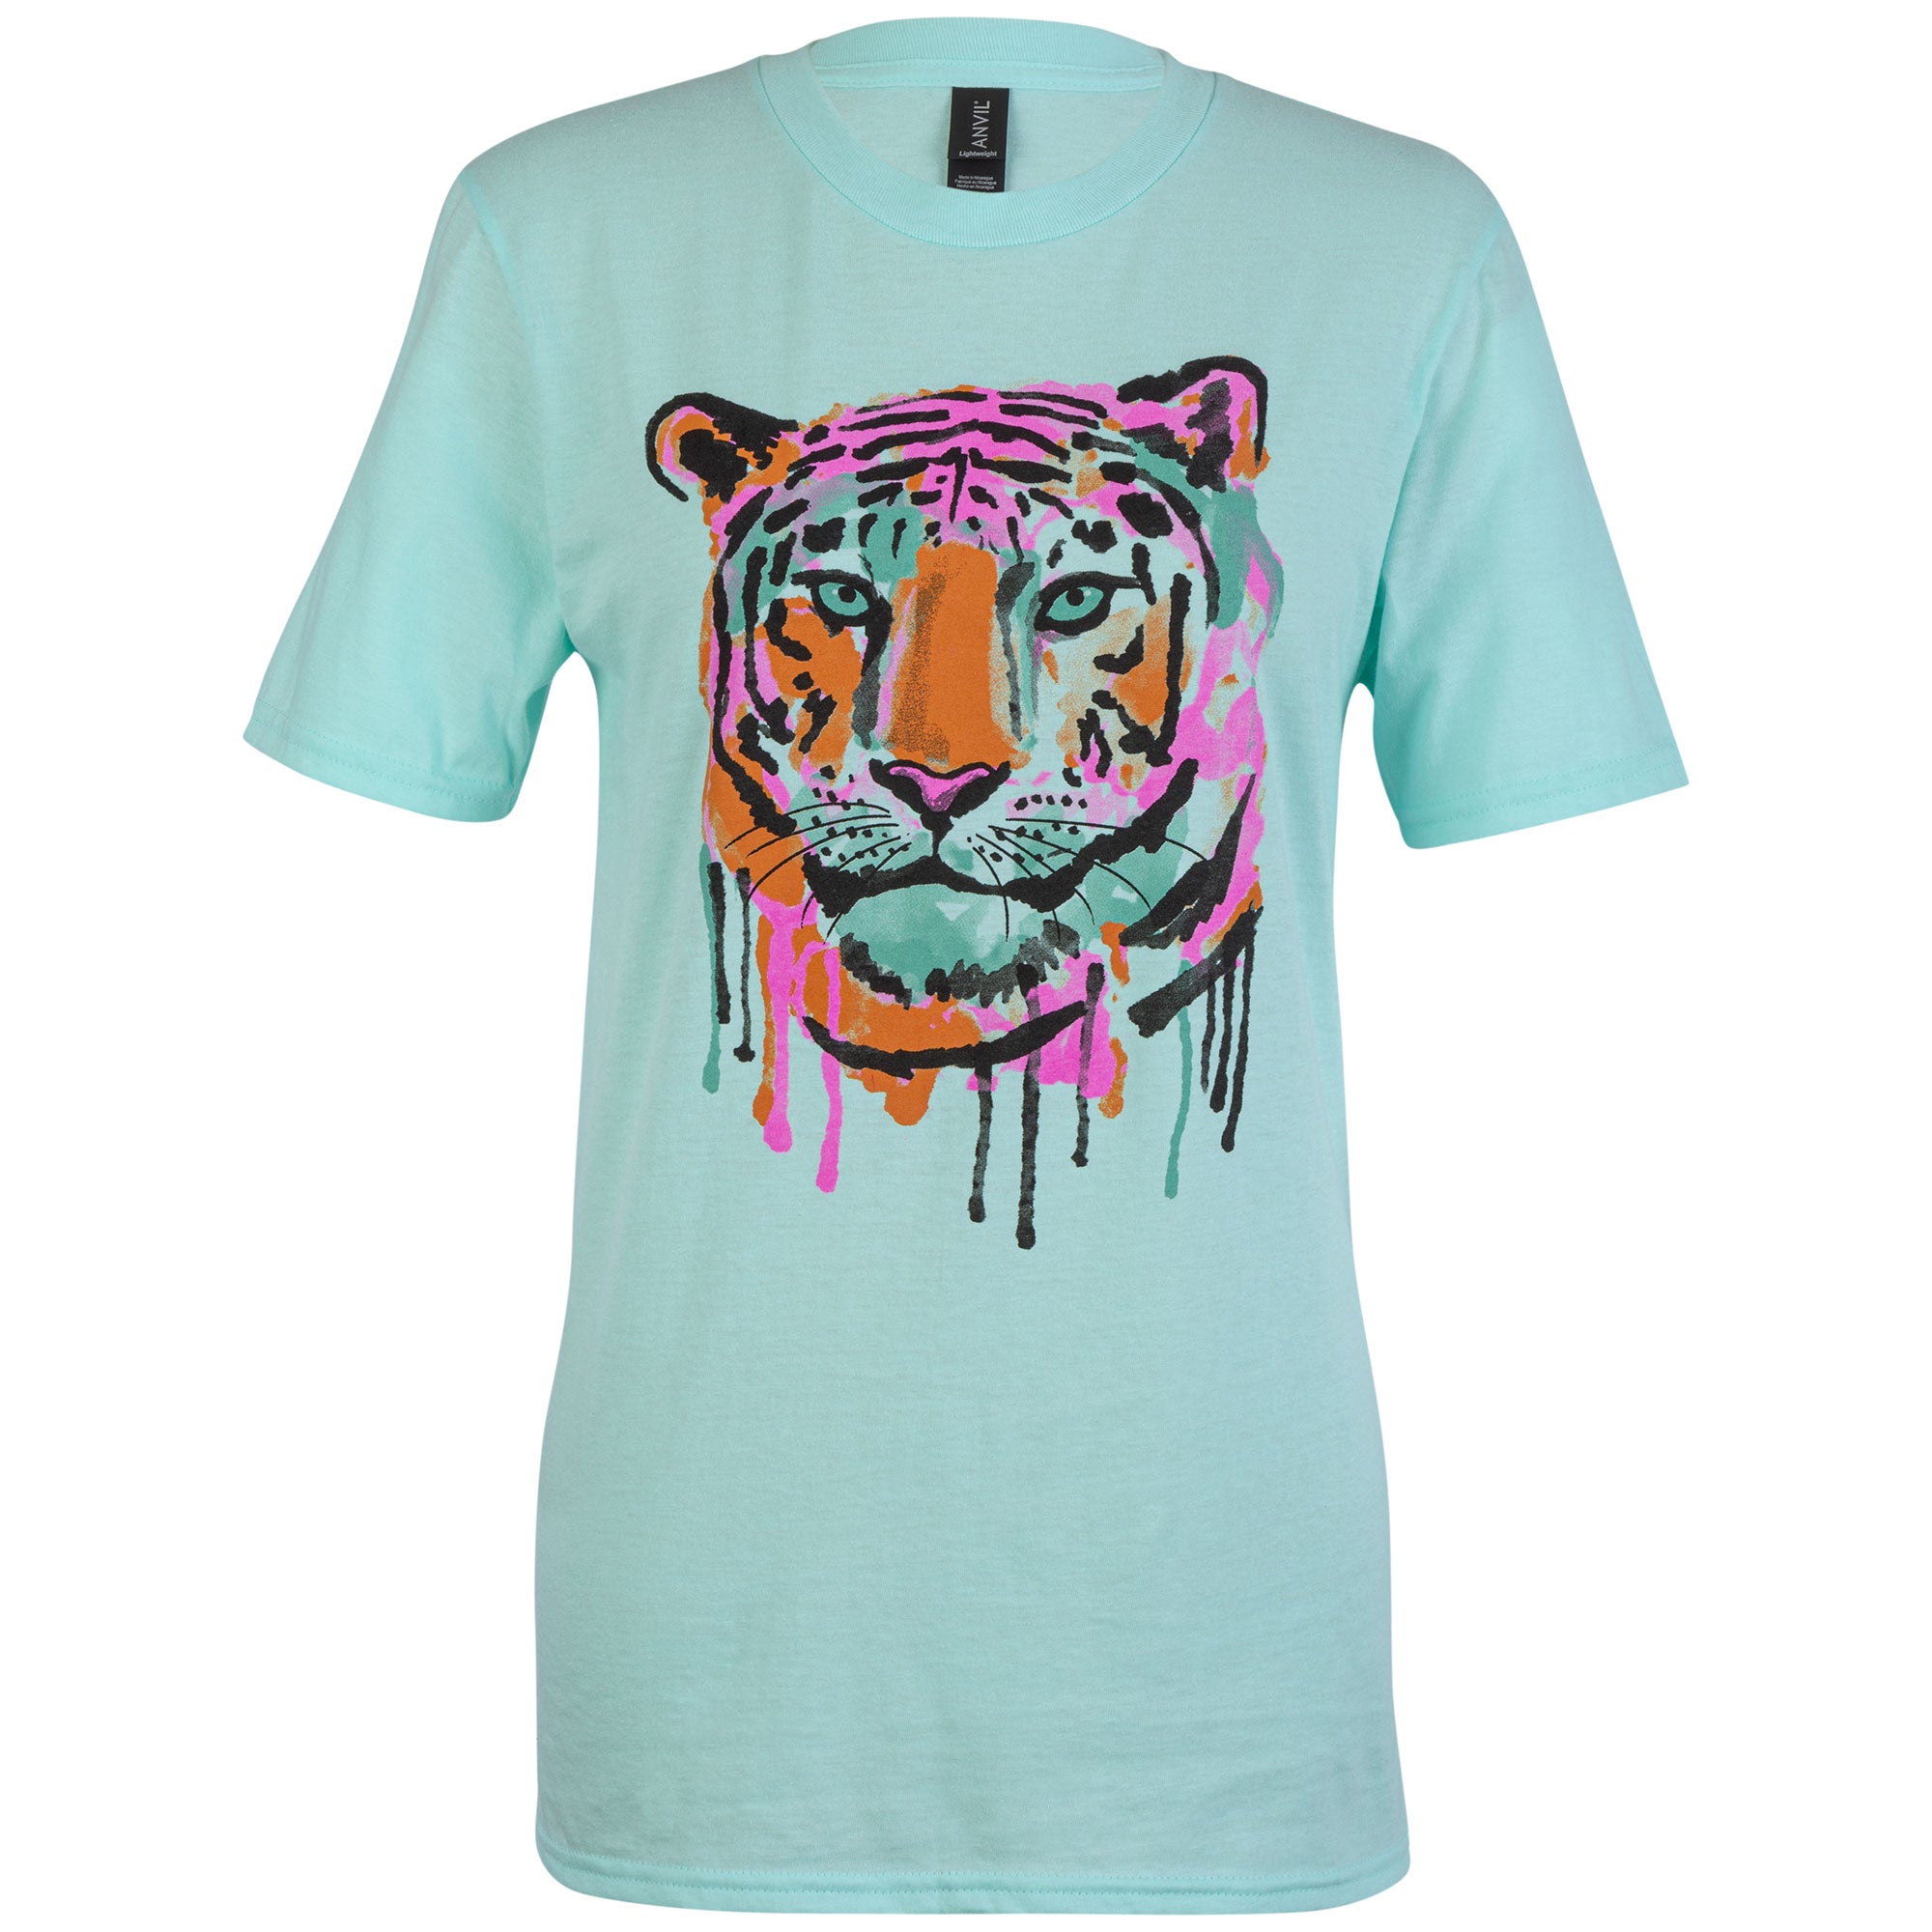 Painted Tiger T-Shirt - L